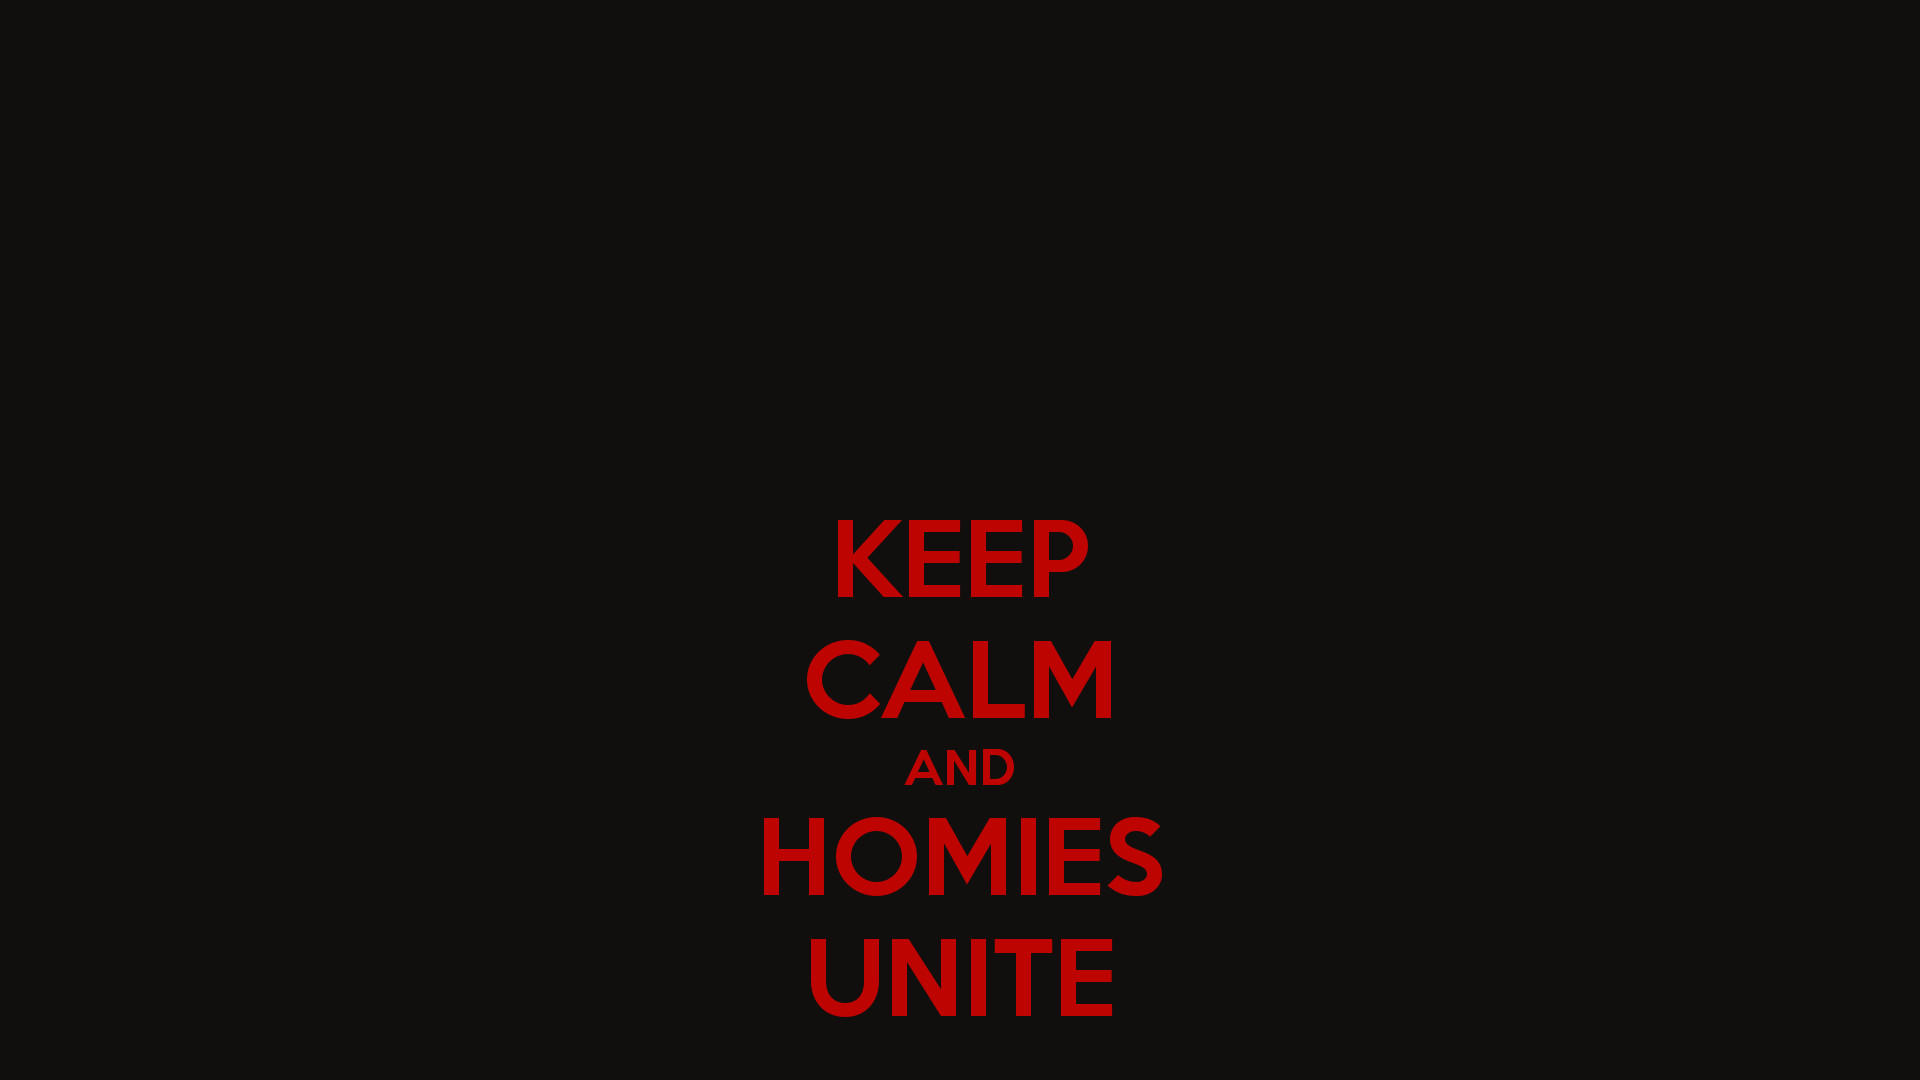 KEEP CALM AND HOMIES UNITE – KEEP CALM AND CARRY ON Image Generator